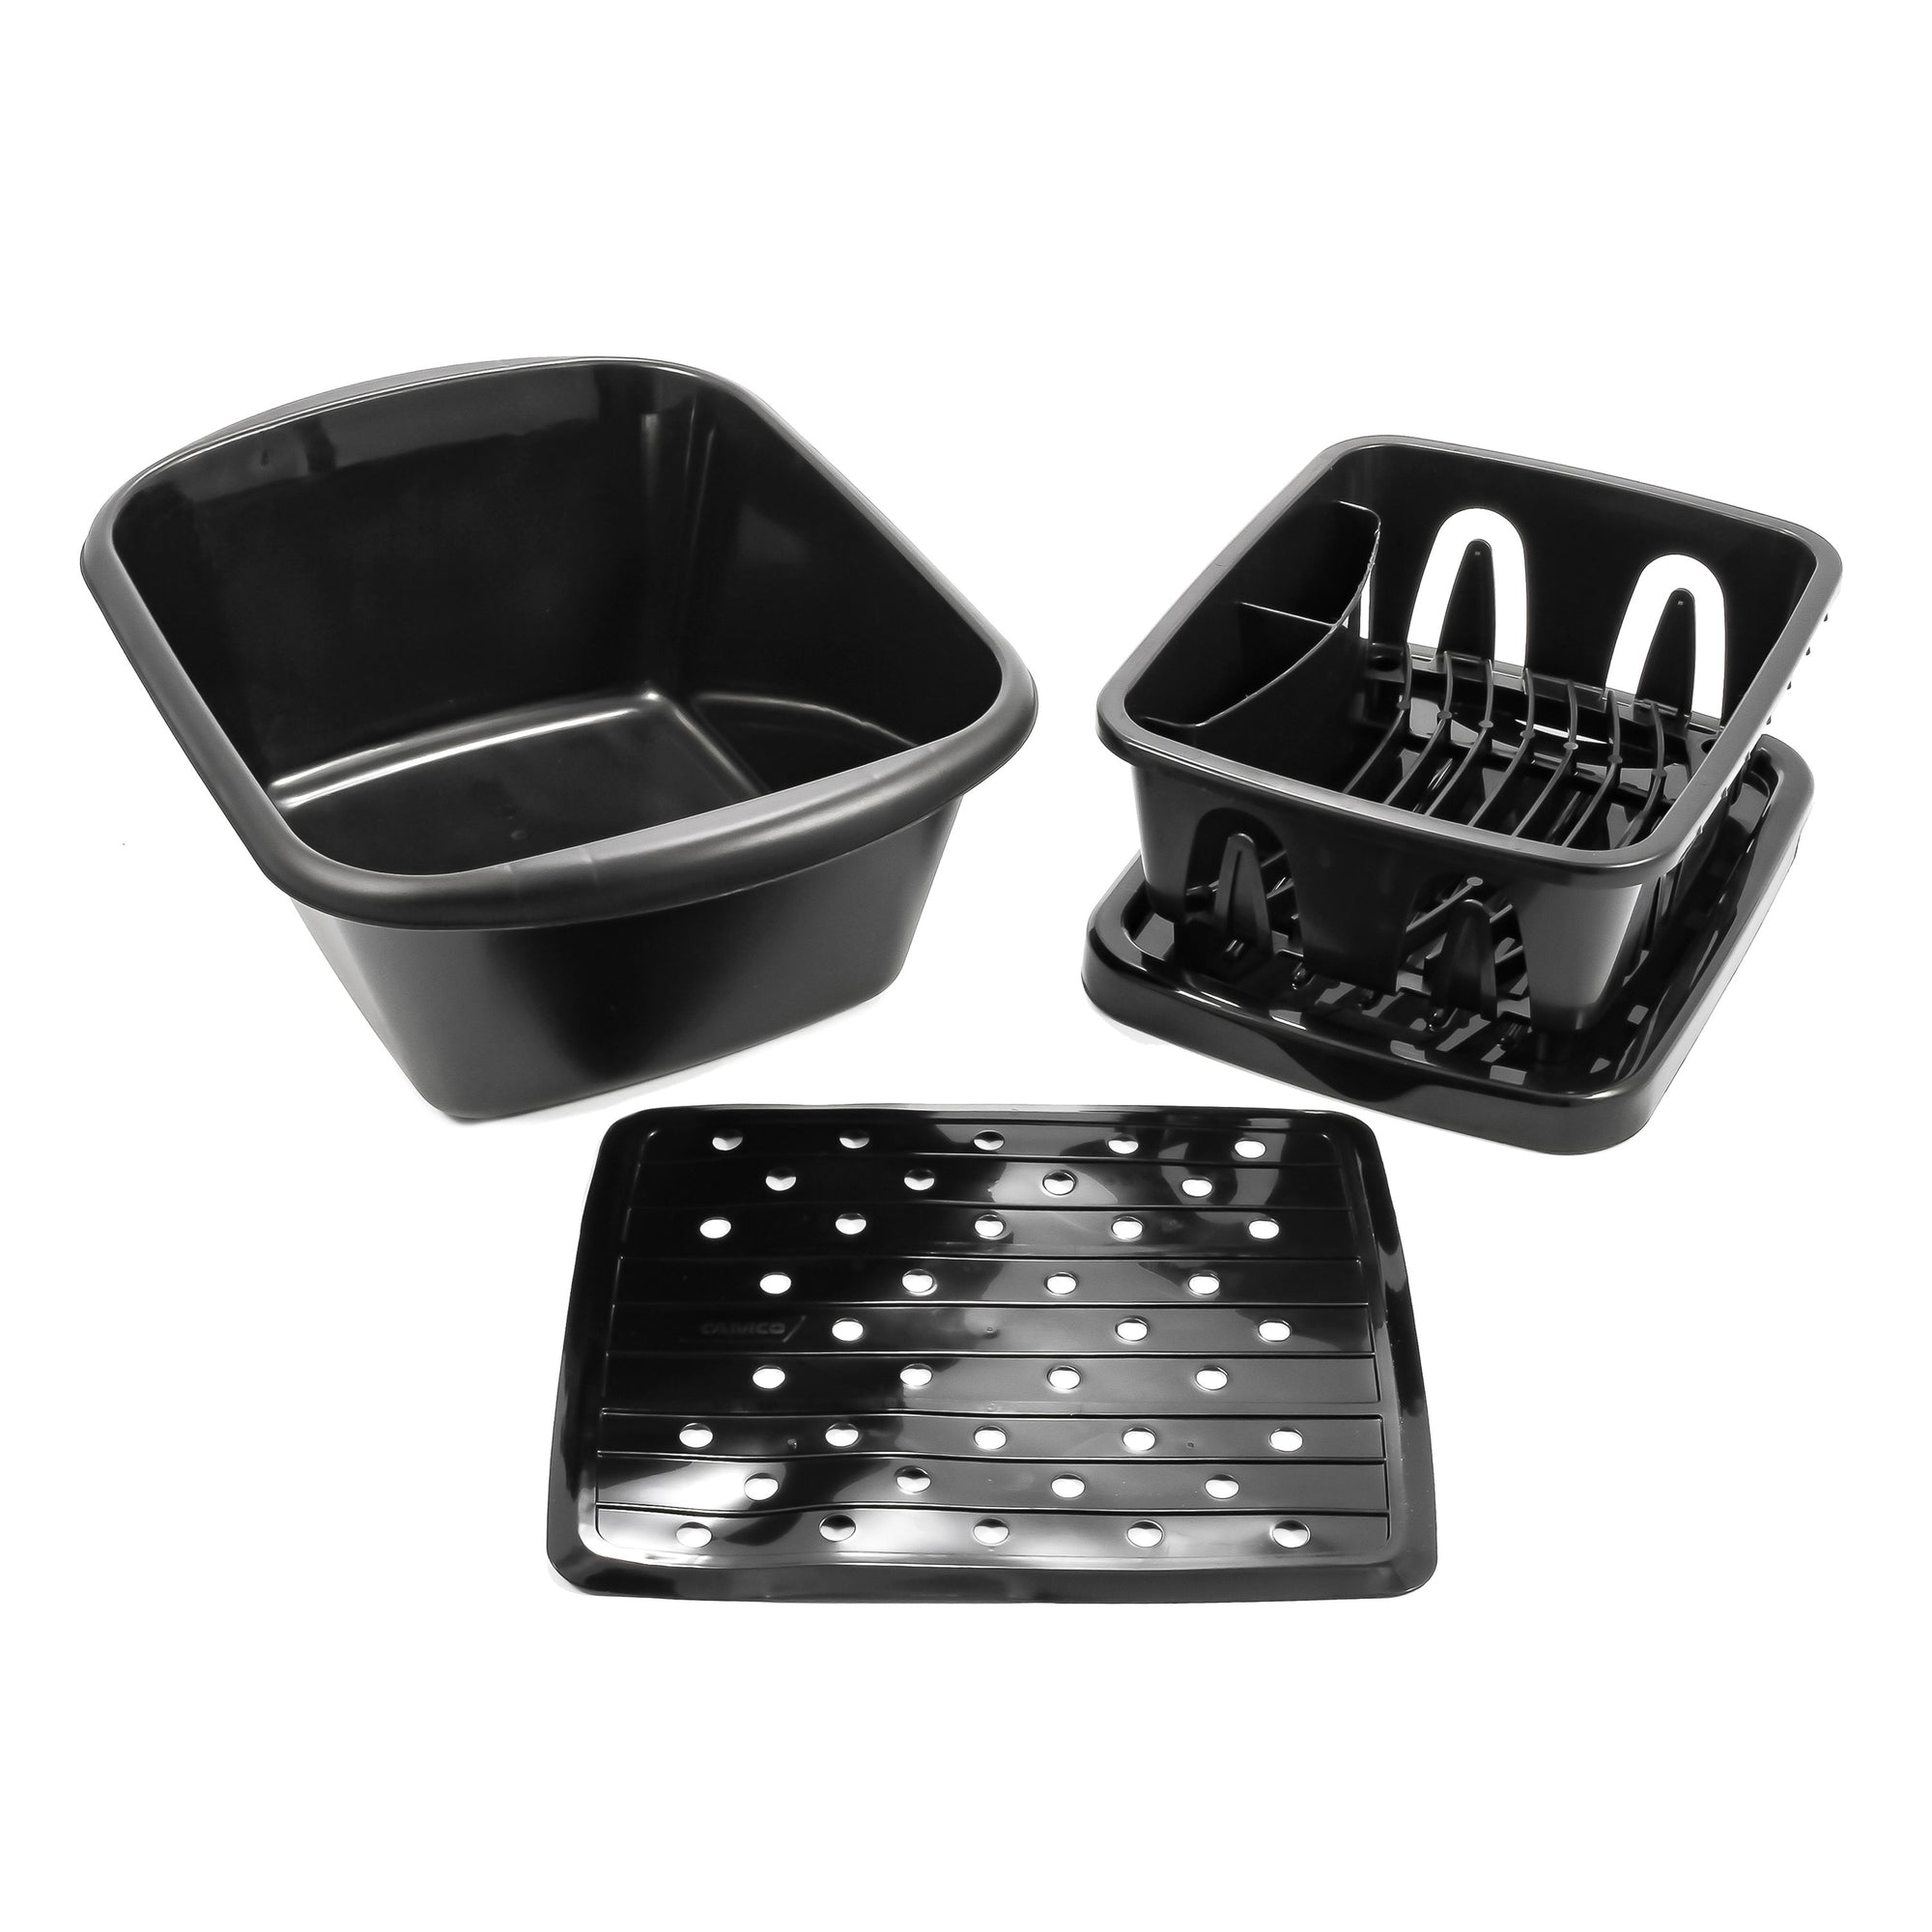 Camco 43518 Sink Kit with Dish Drainer, Dish Pan and Sink Mat - Black